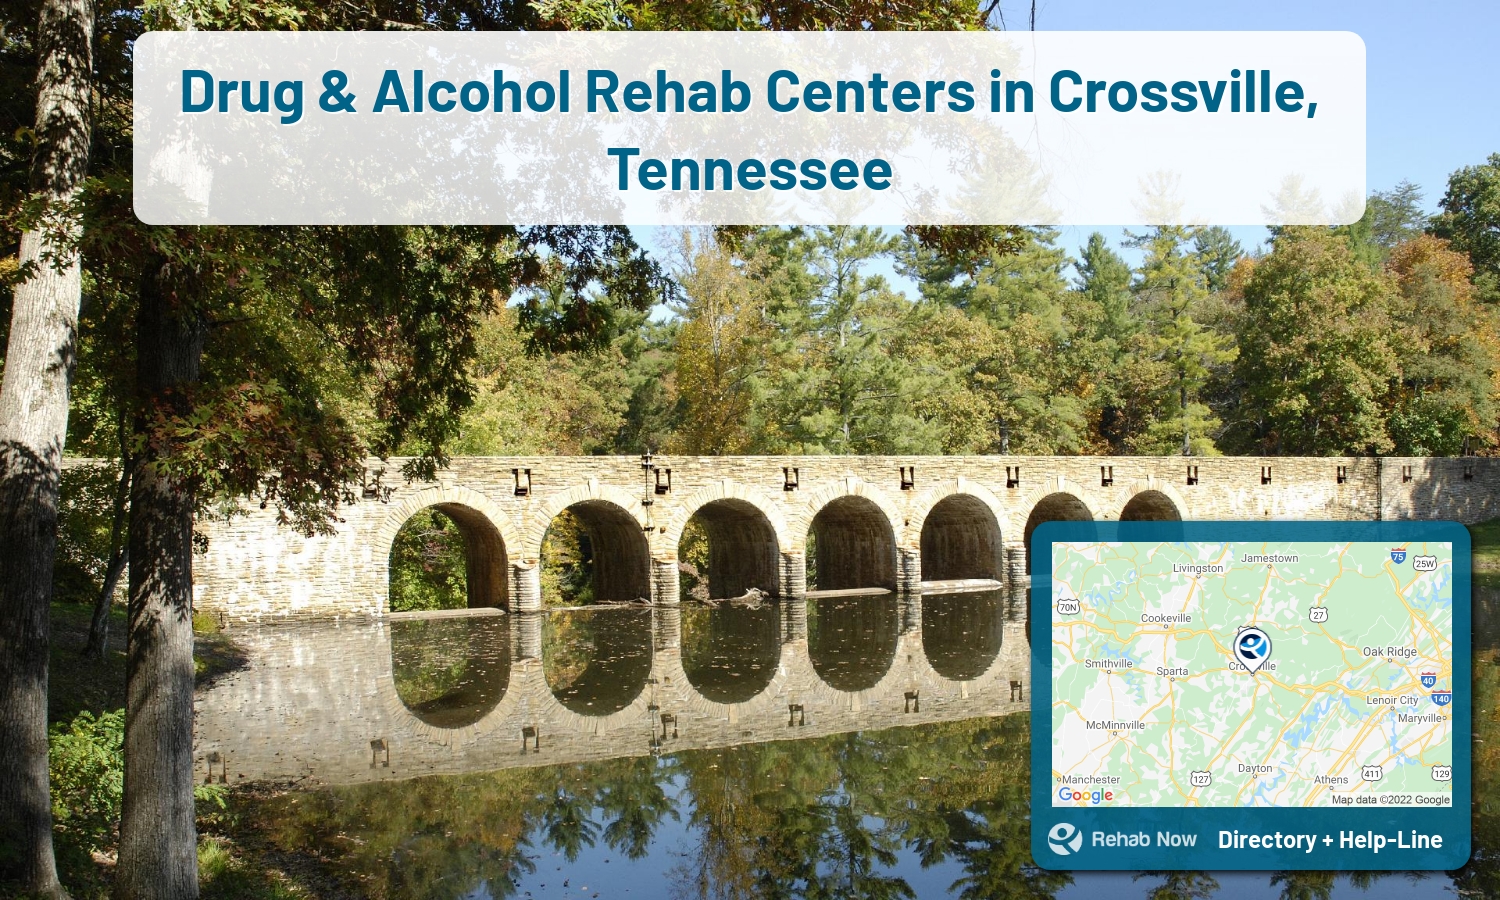 Need treatment nearby in Crossville, Tennessee? Choose a drug/alcohol rehab center from our list, or call our hotline now for free help.